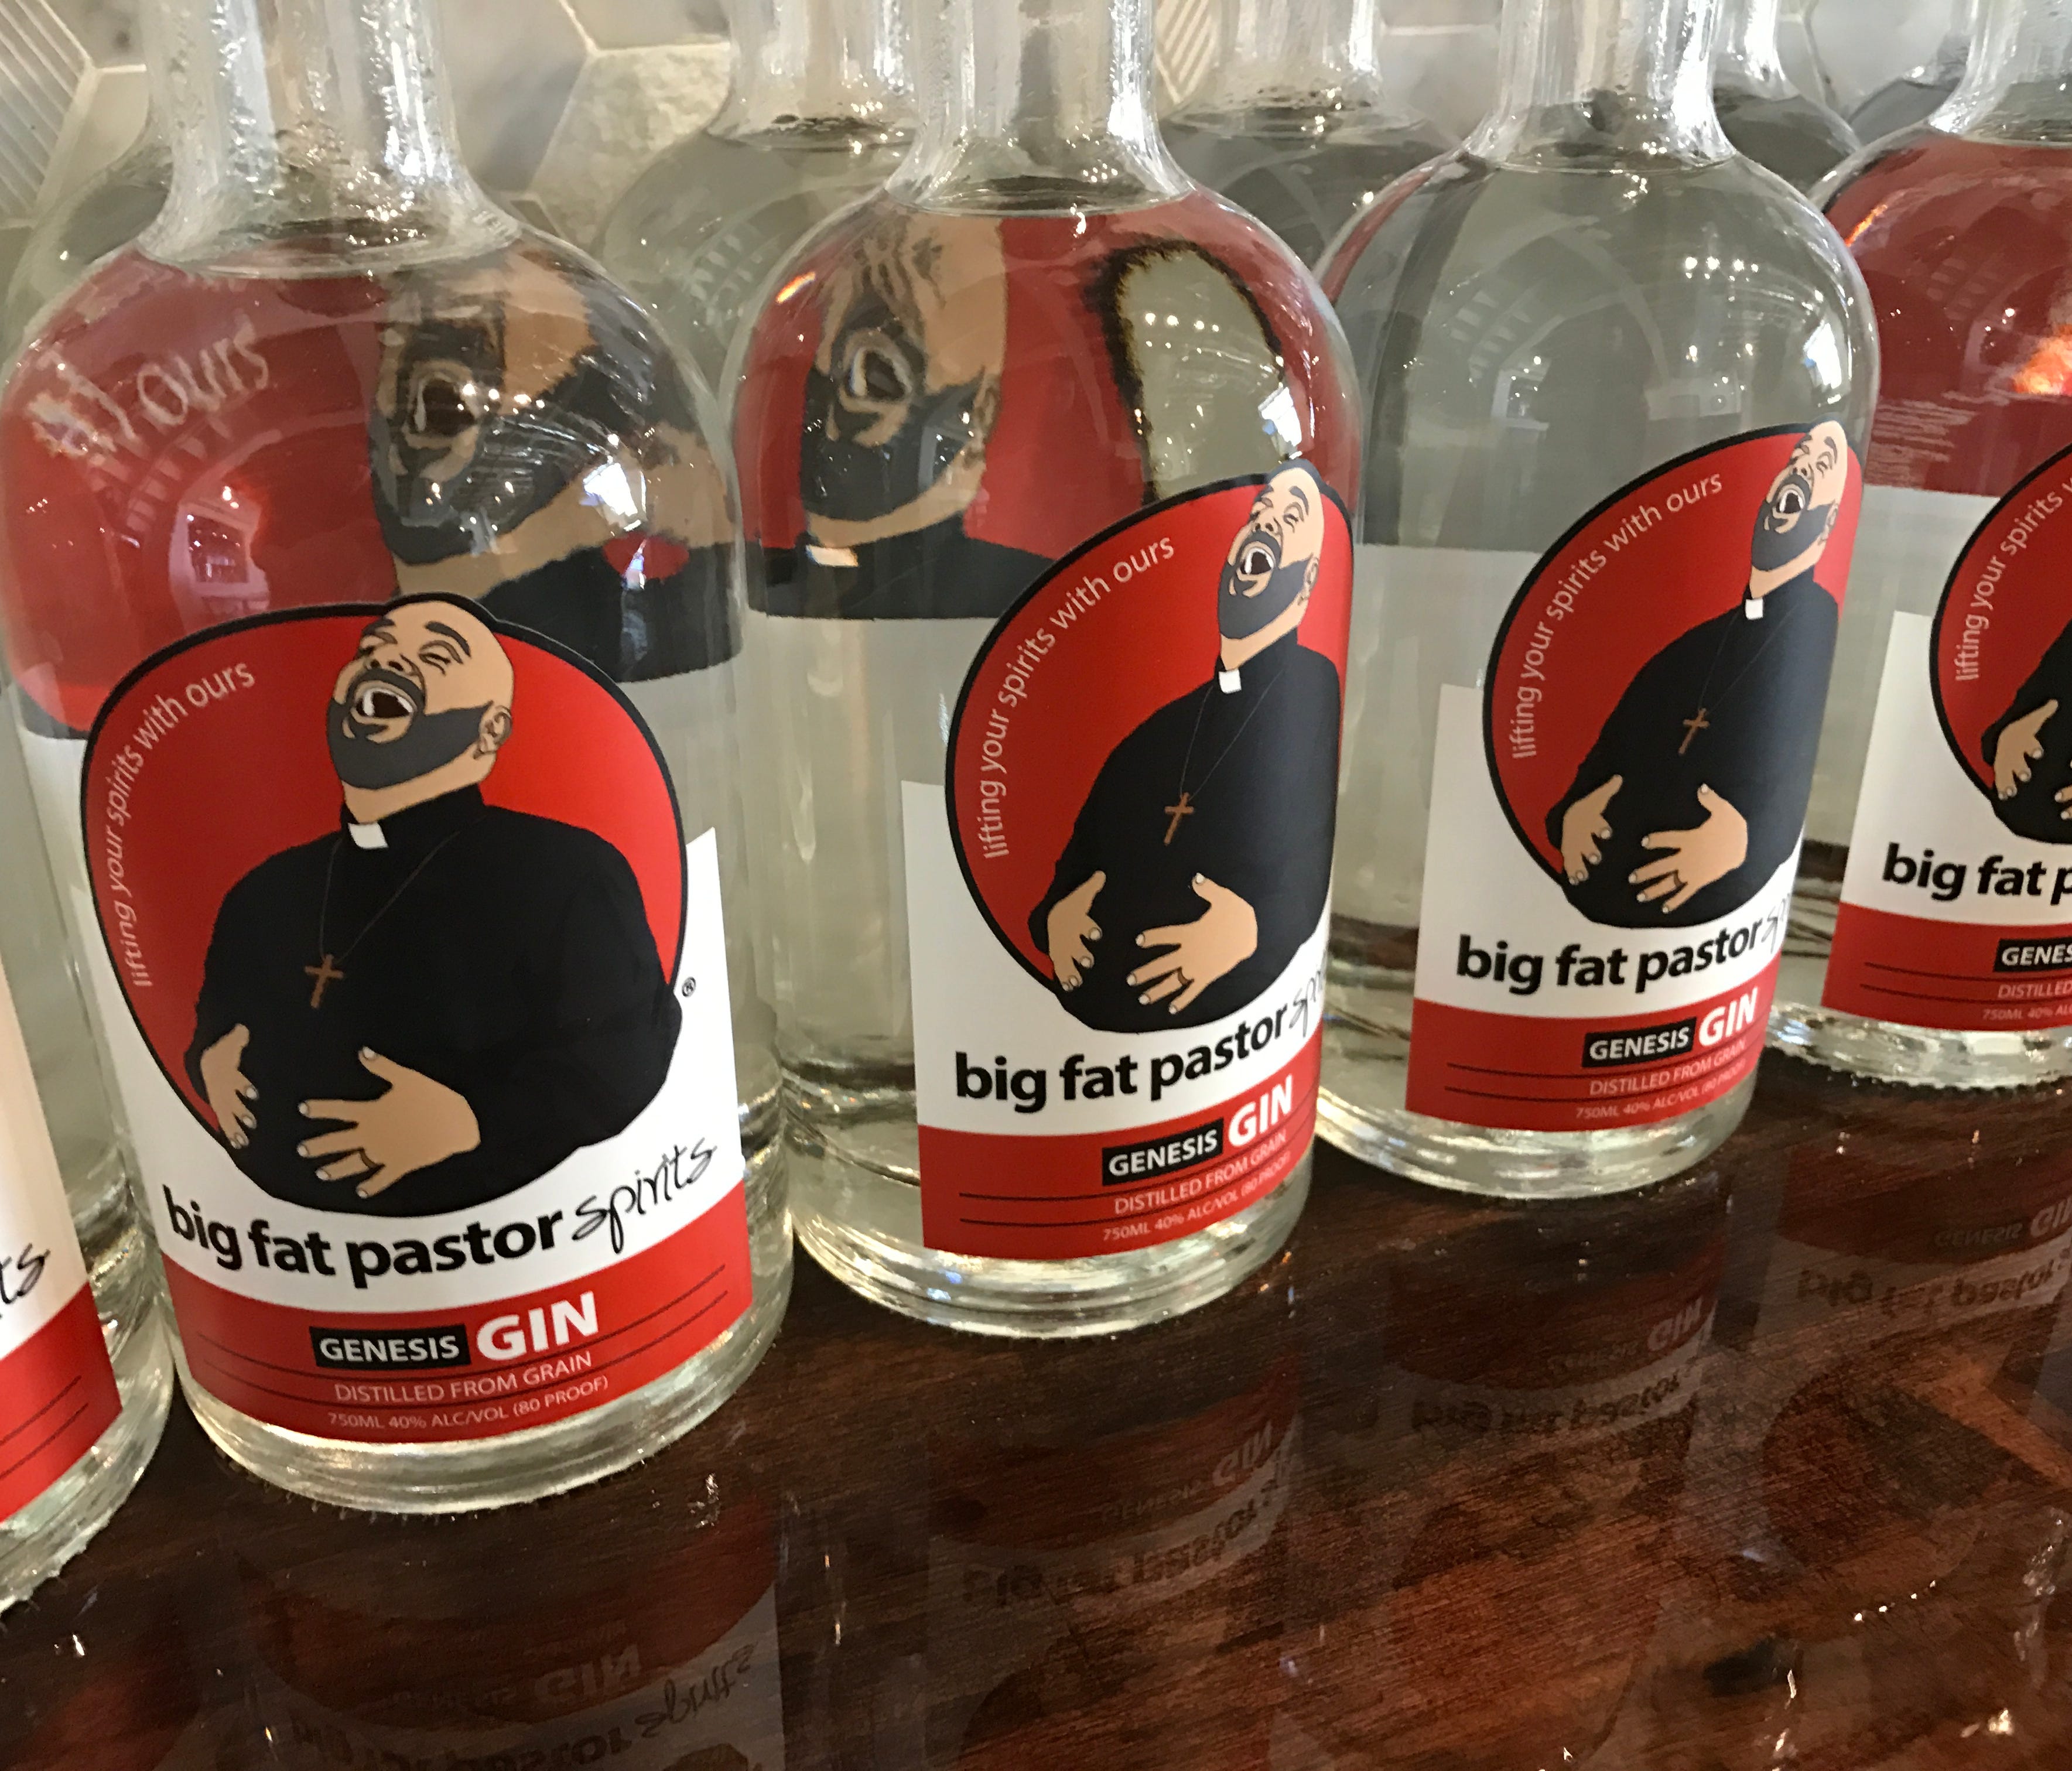 Big Fat Pastor Spirits has launched with gin and vodka products. The distillery also has whiskey aging.